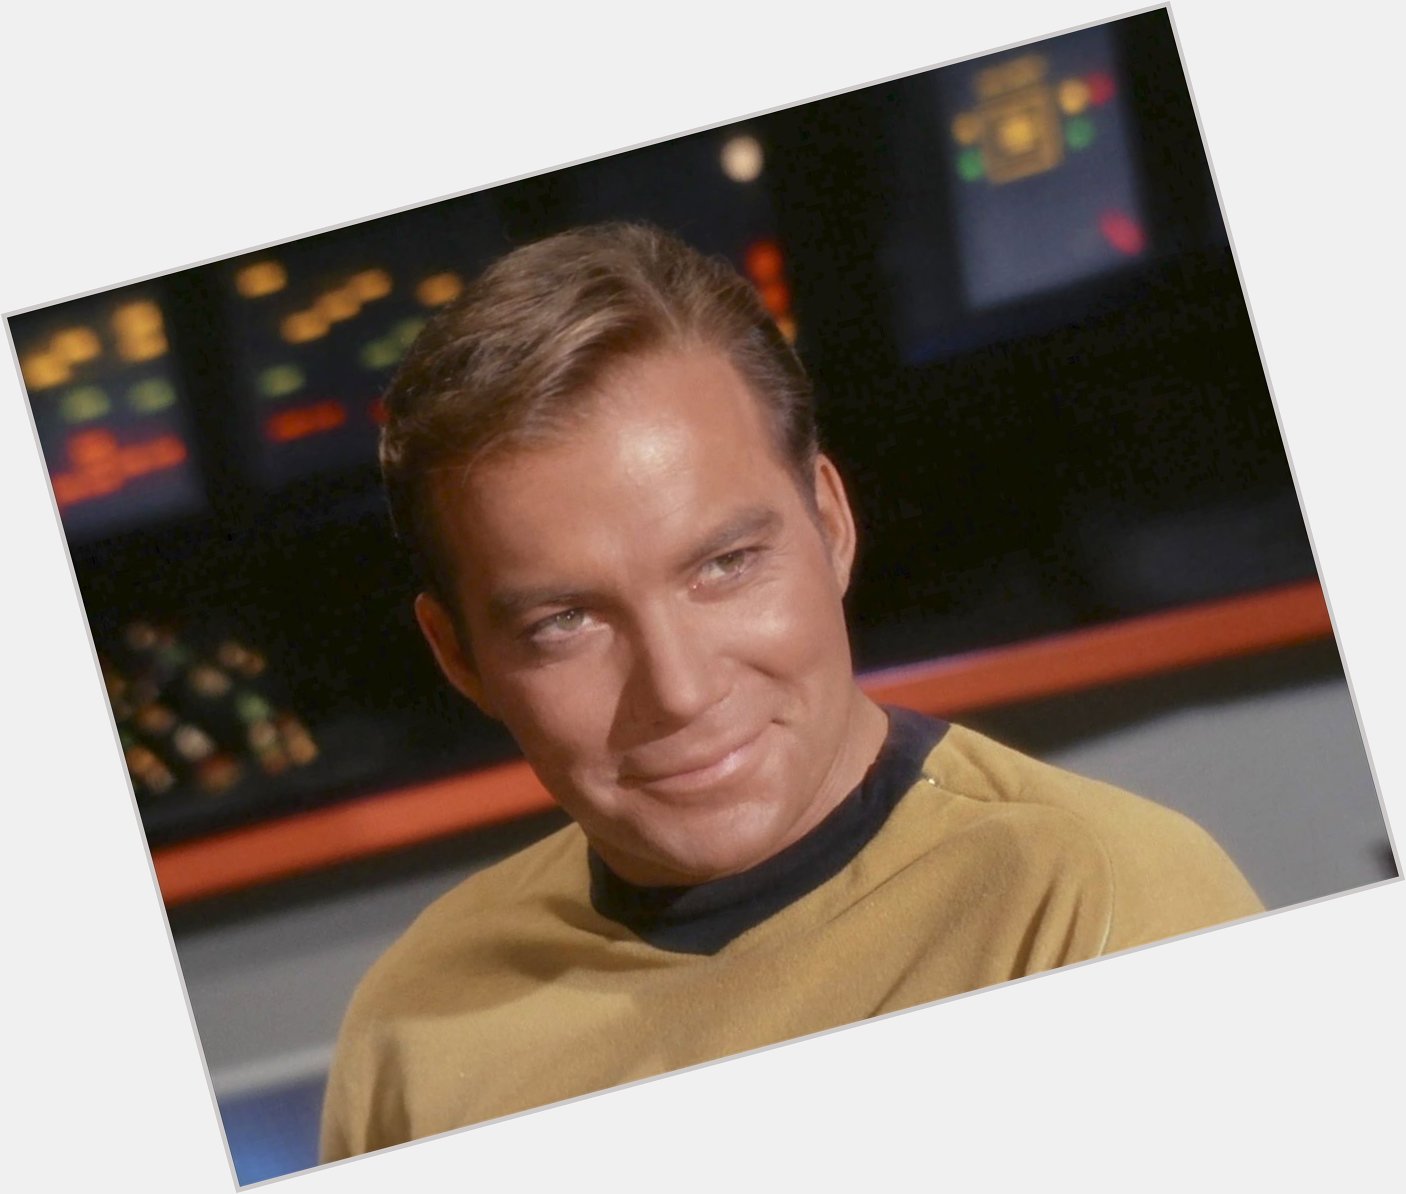 REmessage and wish a very HAPPY BIRTHDAY to the coolest cat in the galaxy, WILLIAM SHATNER!!  